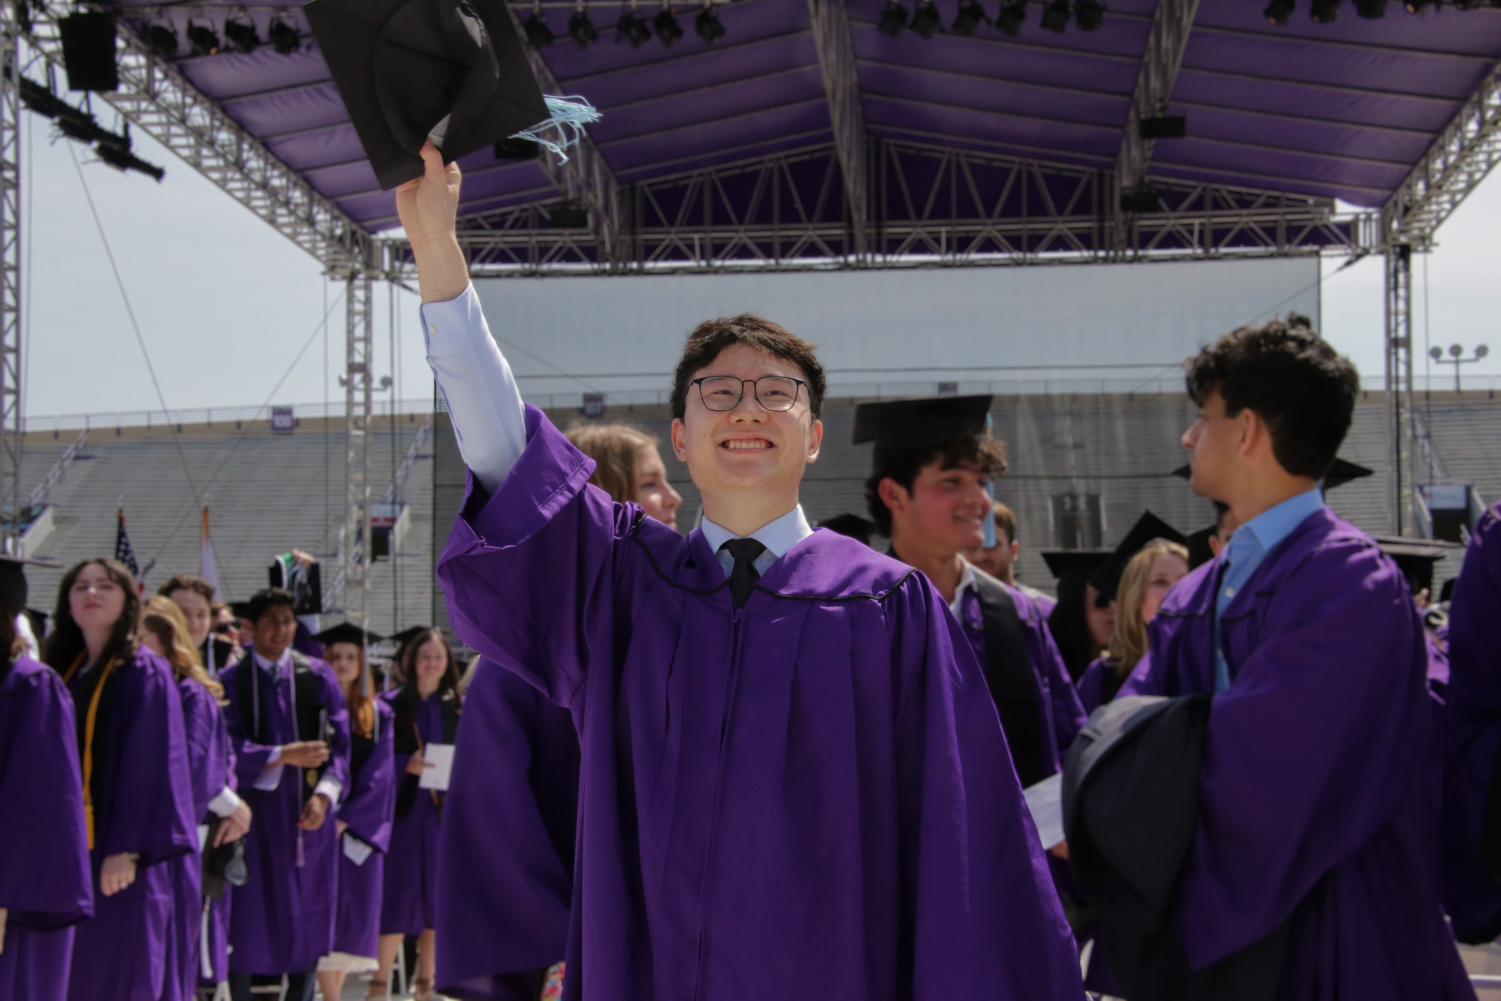 A student in a purple gown raises their arm, with cap in hand, in front of a sea of students.